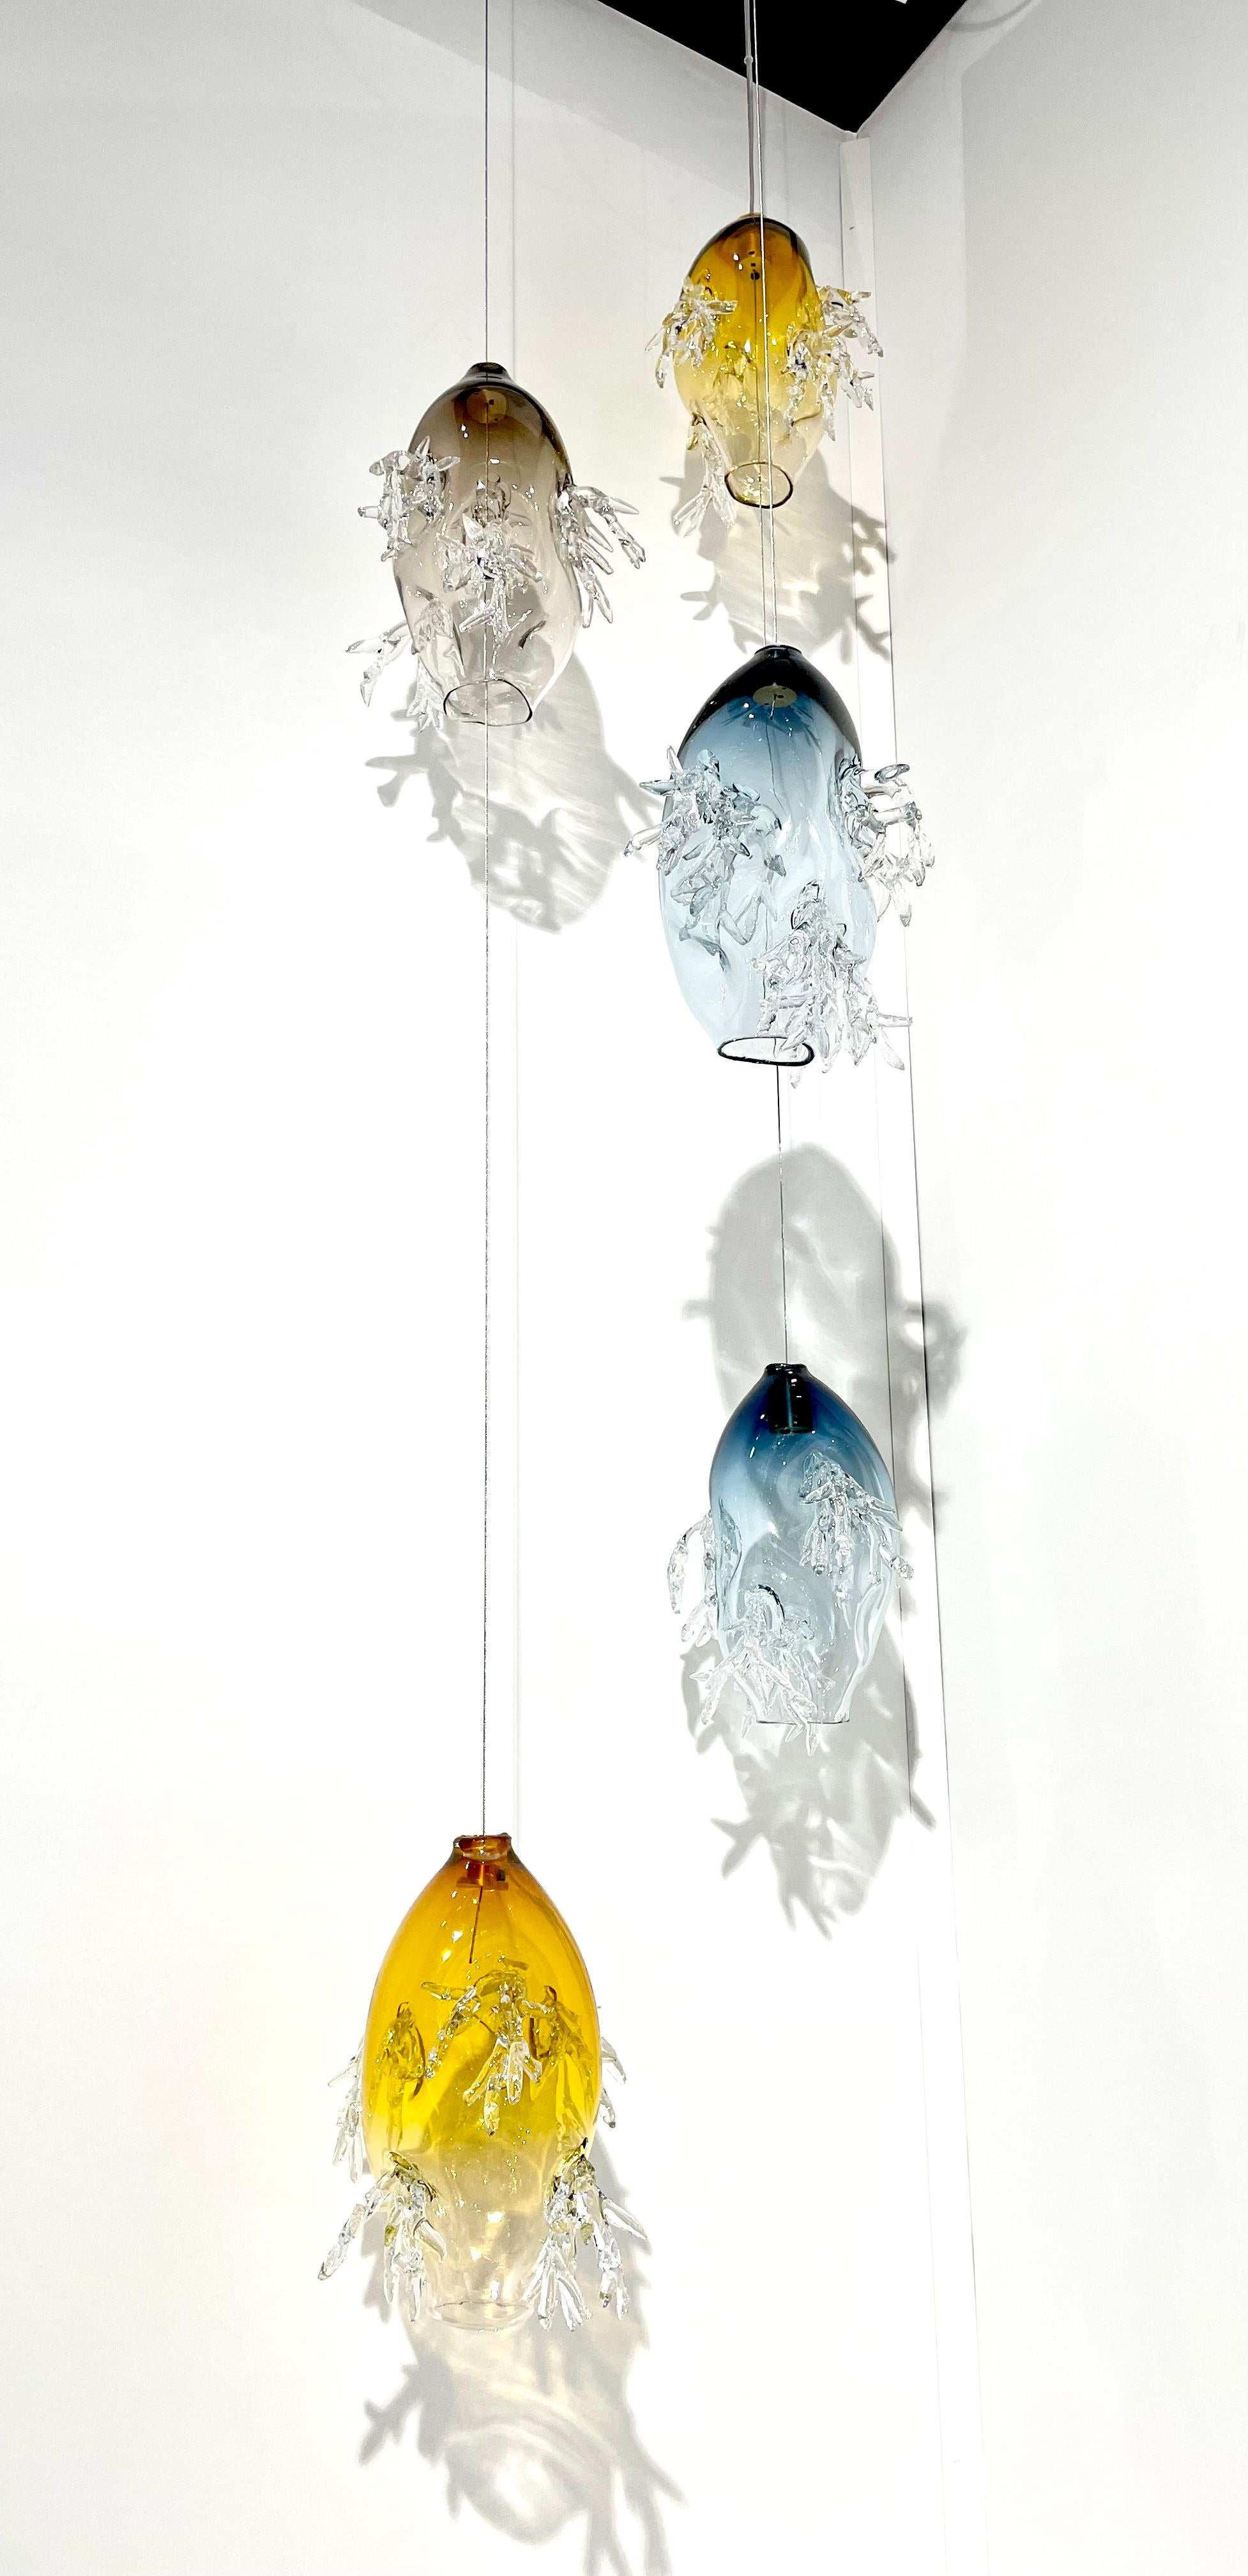 5 Glass Spheres Dryade Chandelier by Emilie Lemardeley
Unique Piece
Dimensions: Ø 60 x H 300 cm. 
Materials: Hand-blown glass and brass.

The height of this chandelier can be customized from 300 to 1000 cm. Please contact us.

All our lamps can be